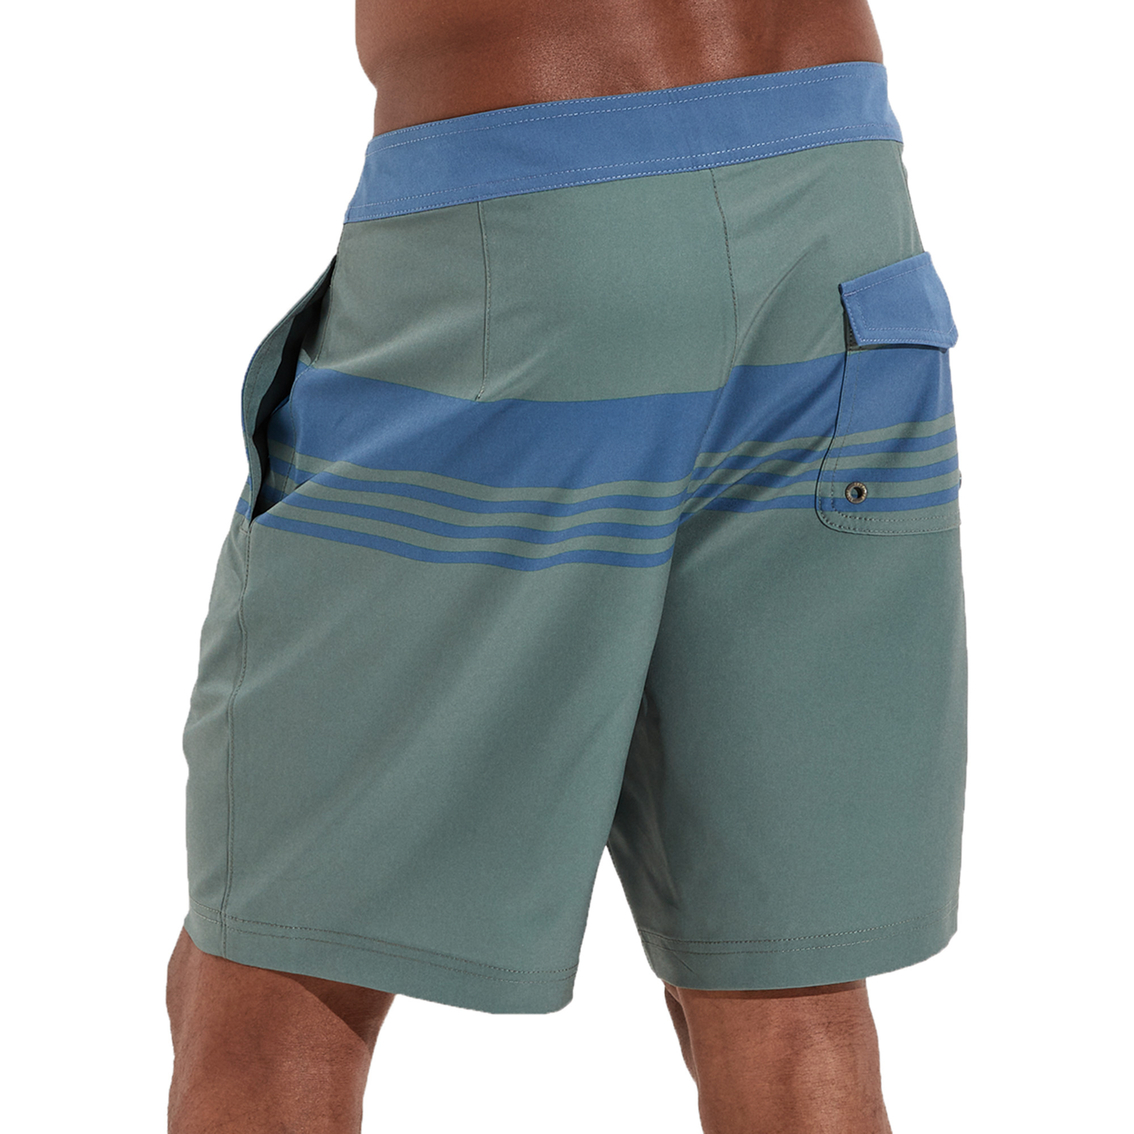 American Eagle 9 in. Board Shorts - Image 2 of 5